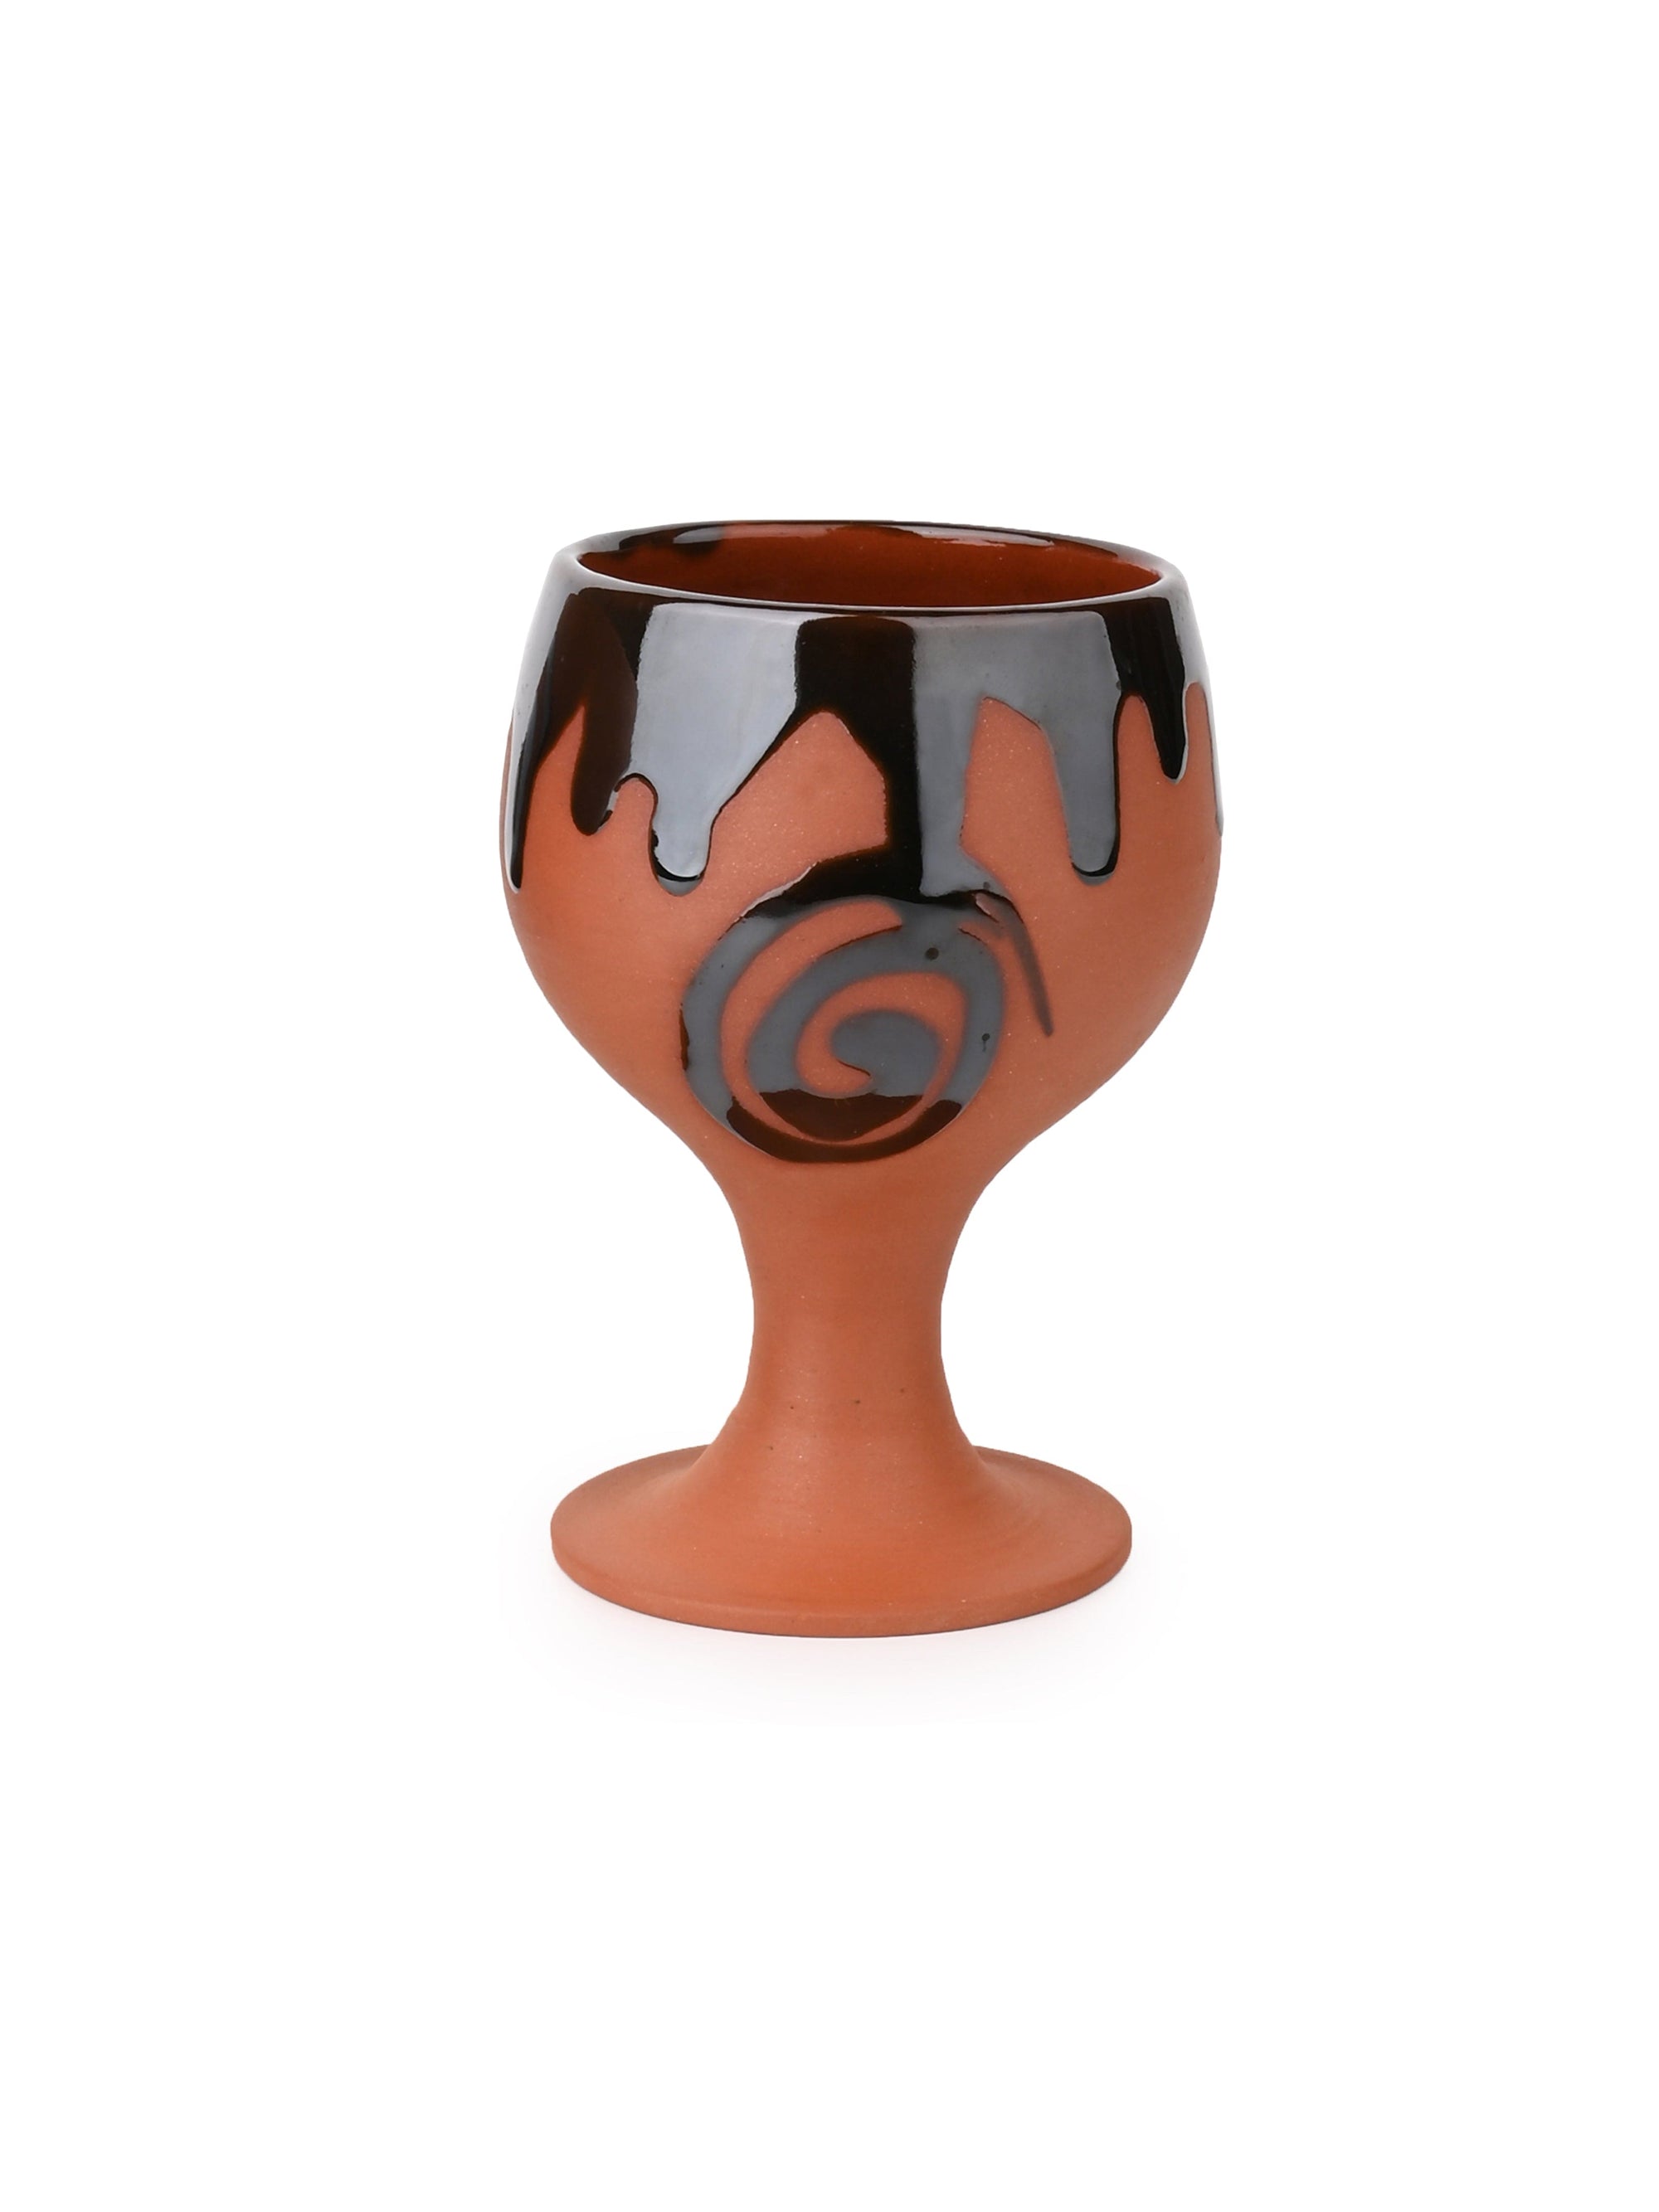 Terracotta Crafted Wine / Liquor Glass Set of 2 pieces